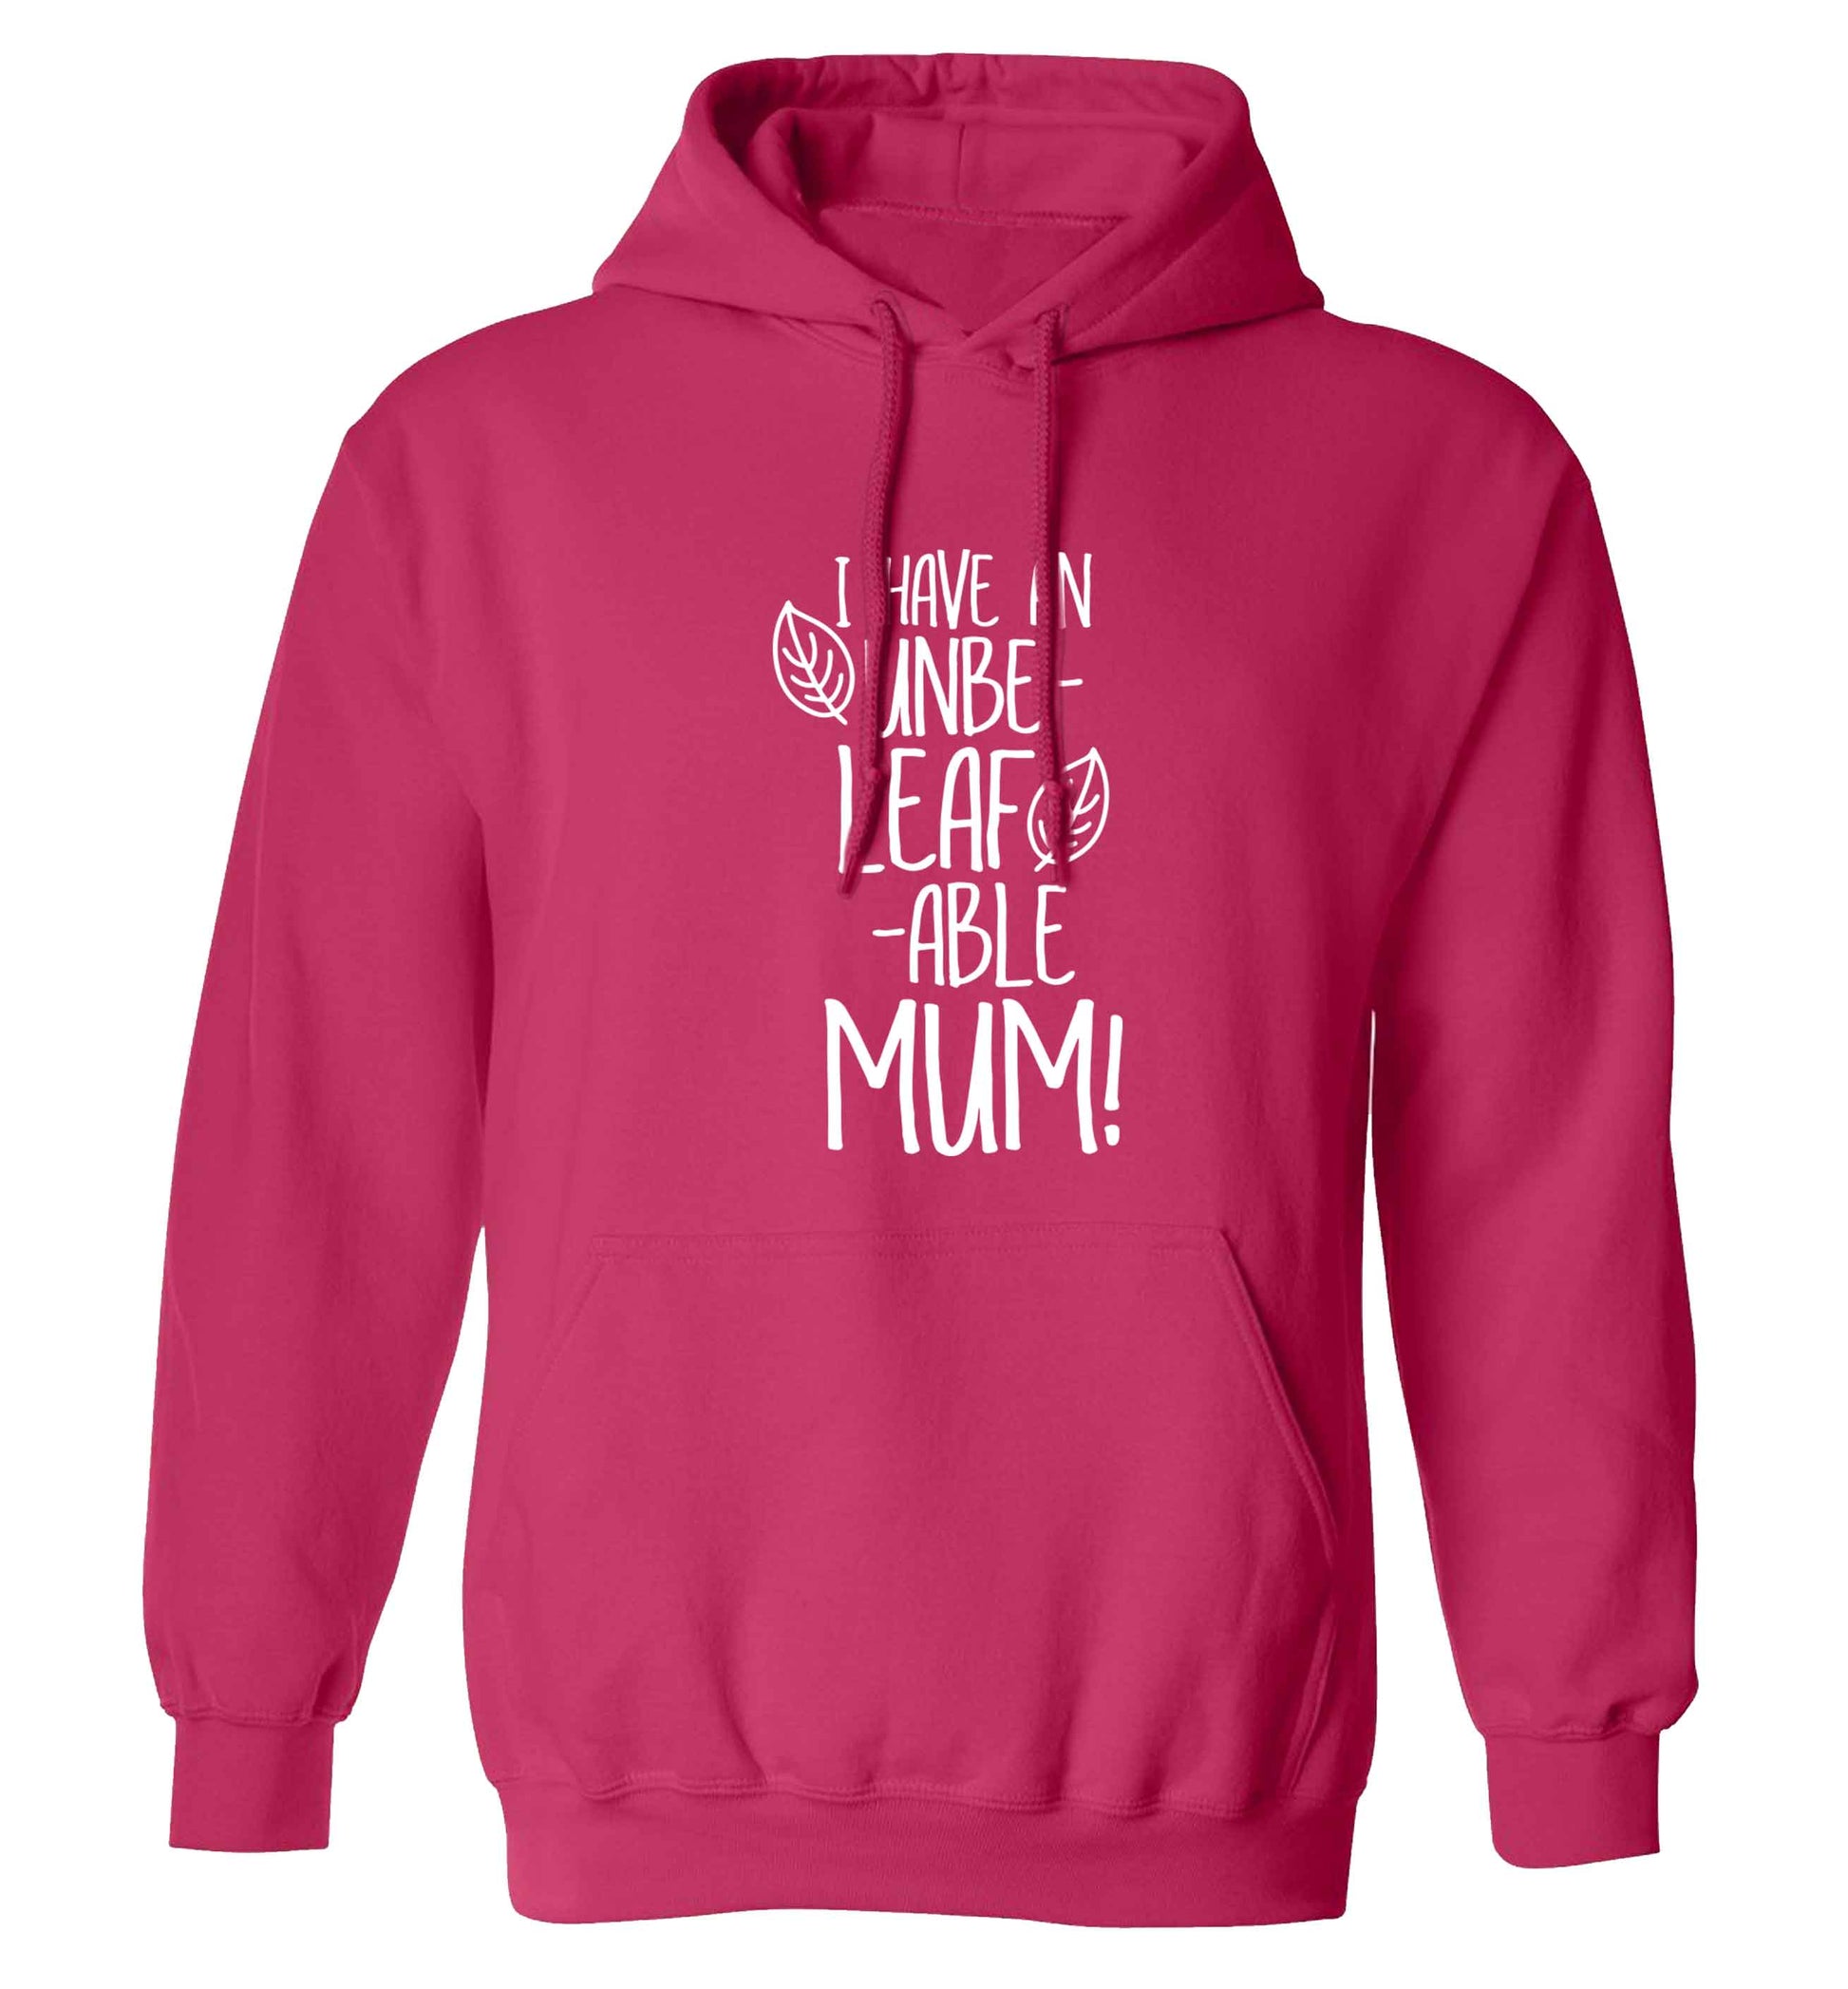 I have an unbeleafable mum! adults unisex pink hoodie 2XL